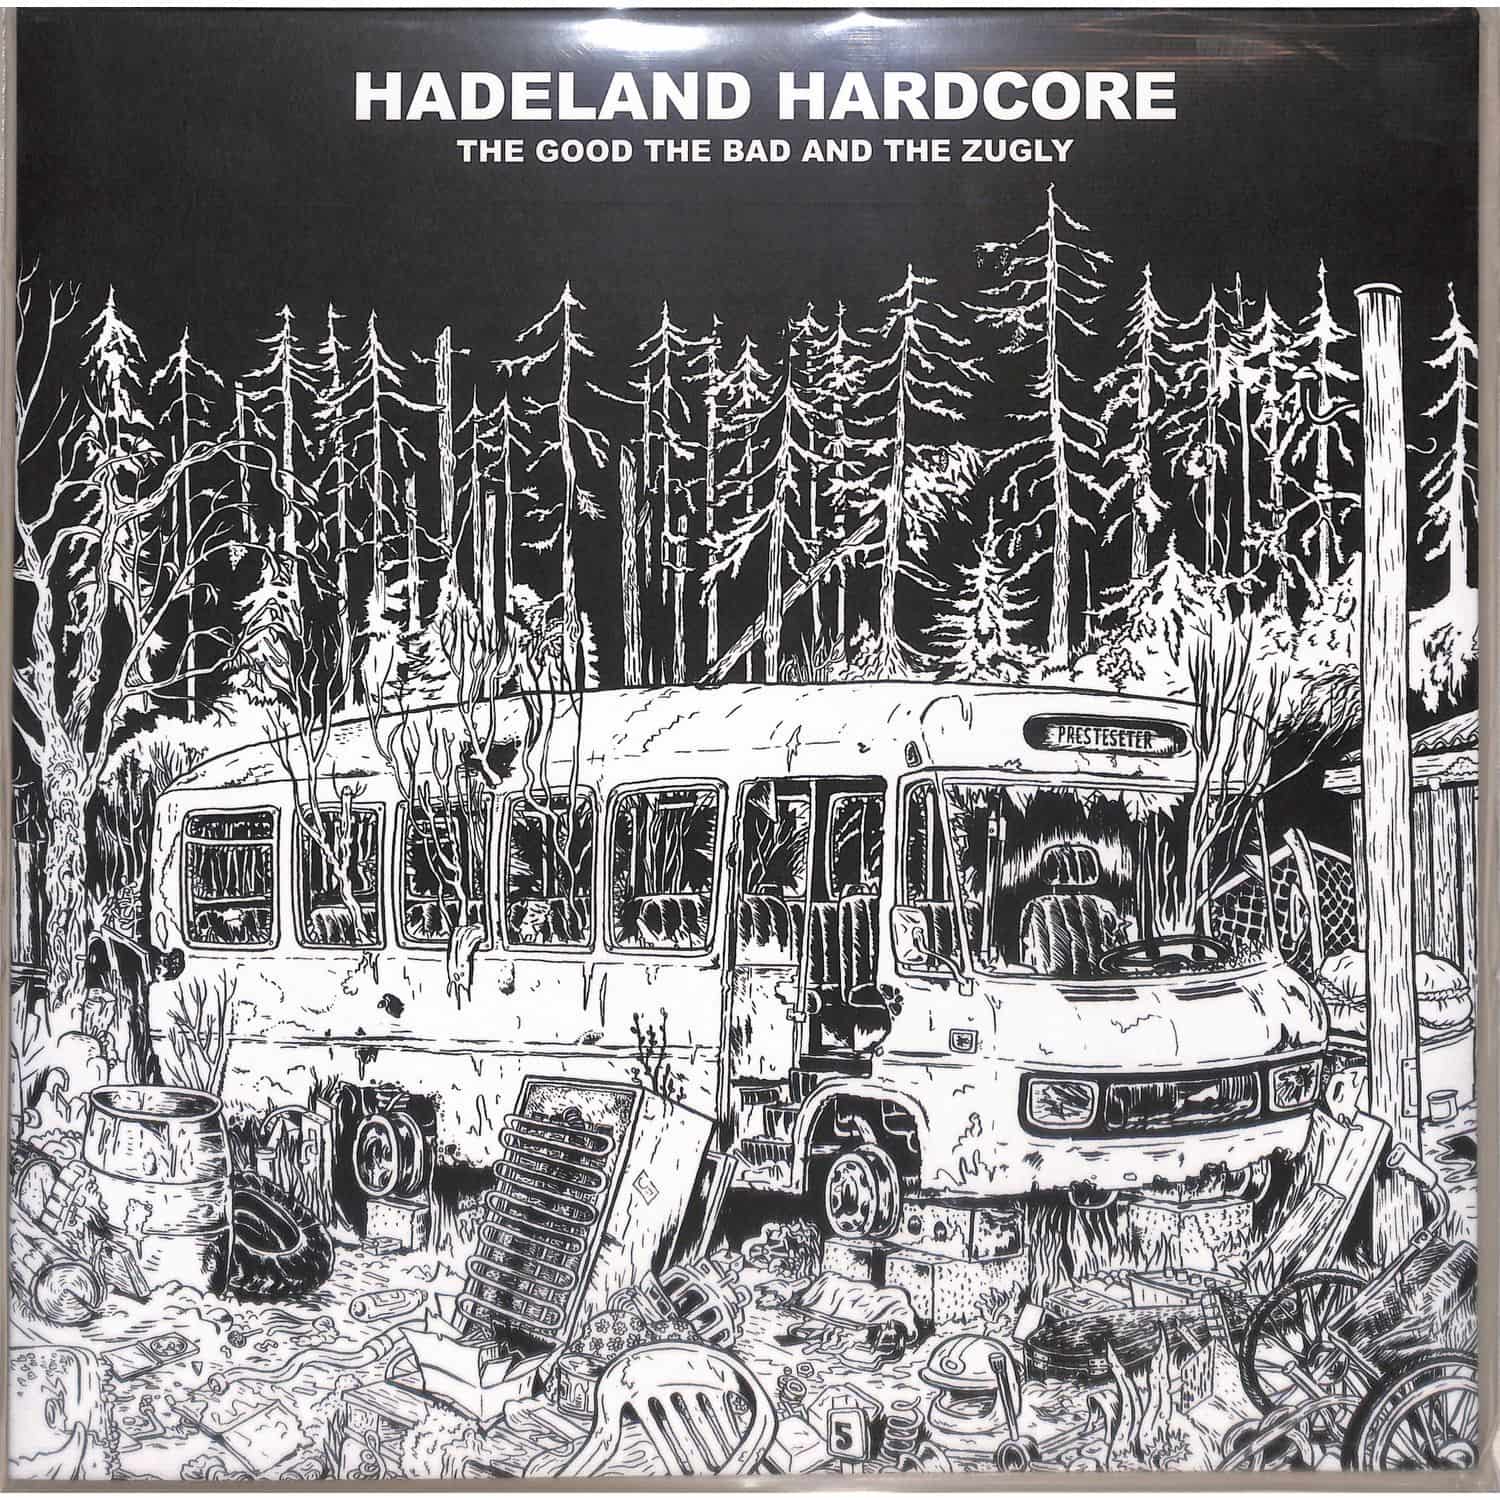 The Good, The Bad & The Zugly - HADELAND HARDCORE 